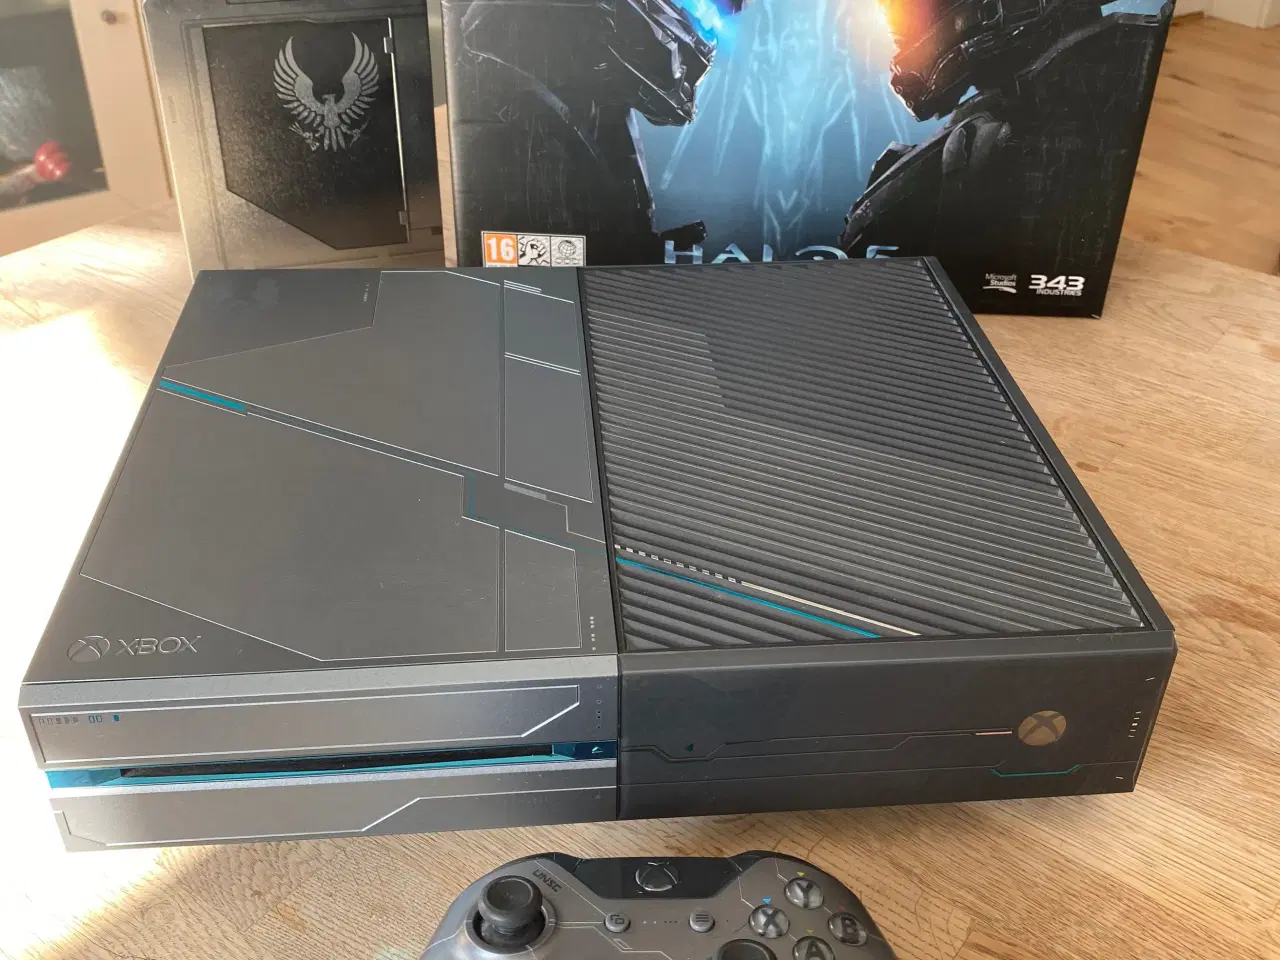 Billede 1 - Halo 5 Limited Edition Xbox One